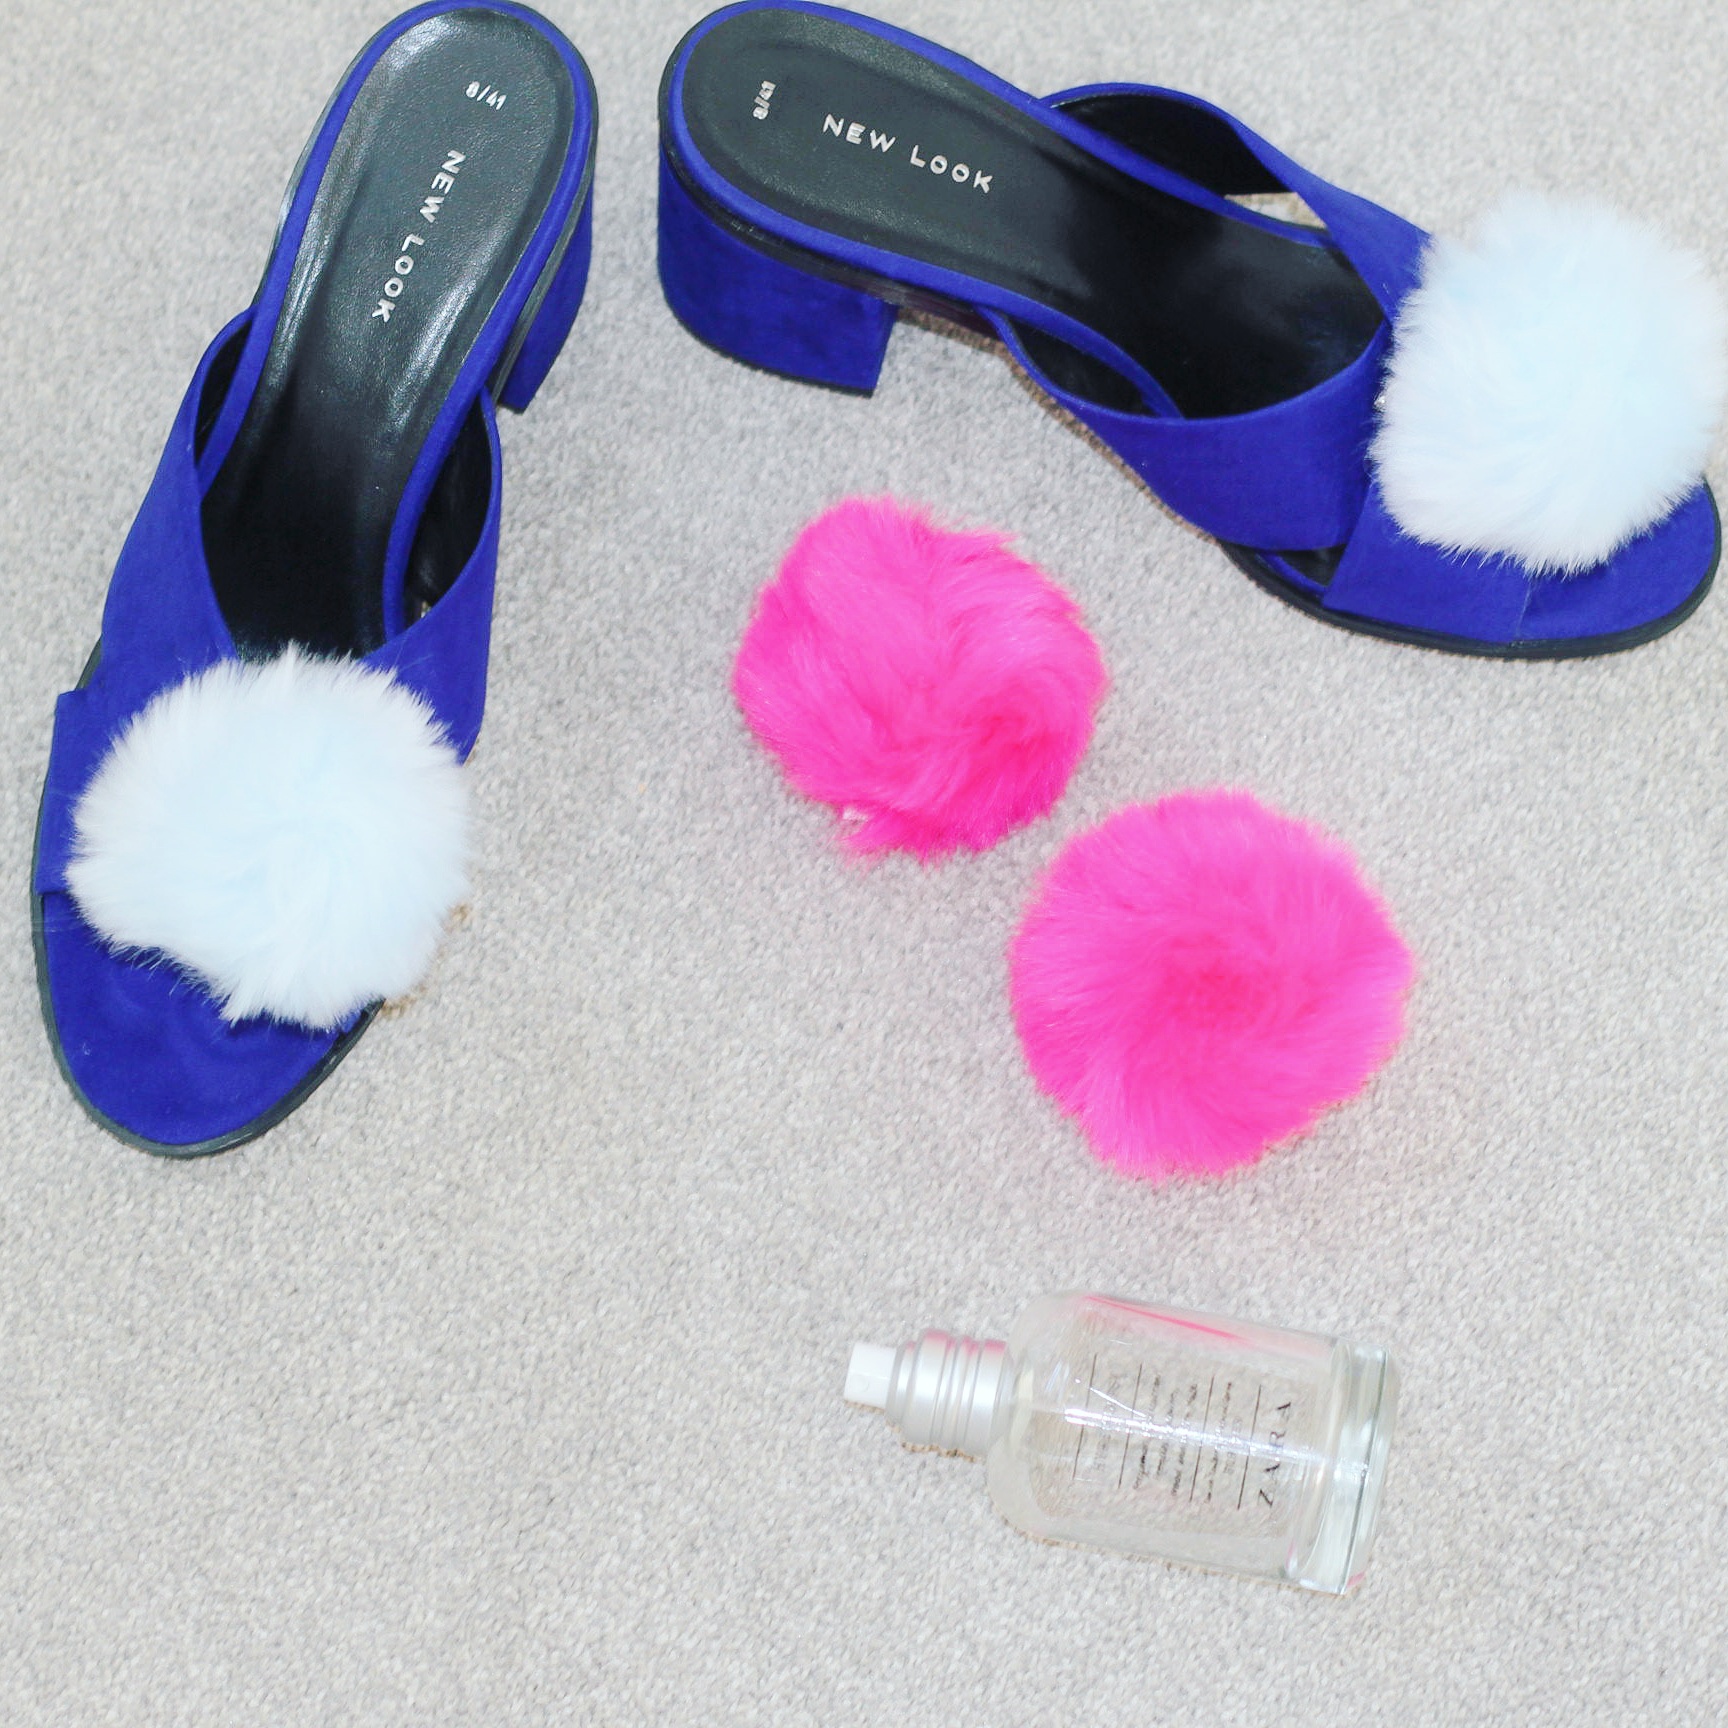 sandals with fluffy pom poms